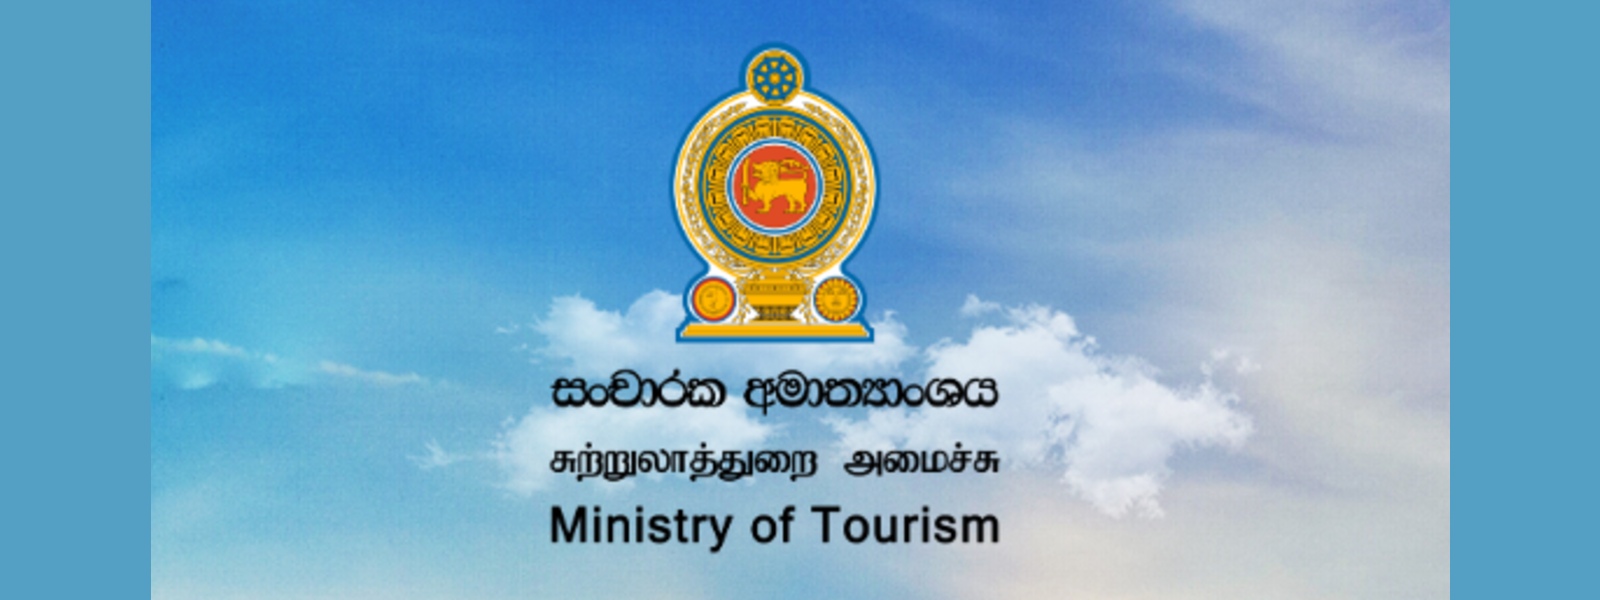 SL tourism fruitful in last quarter of 2021, says Ministry